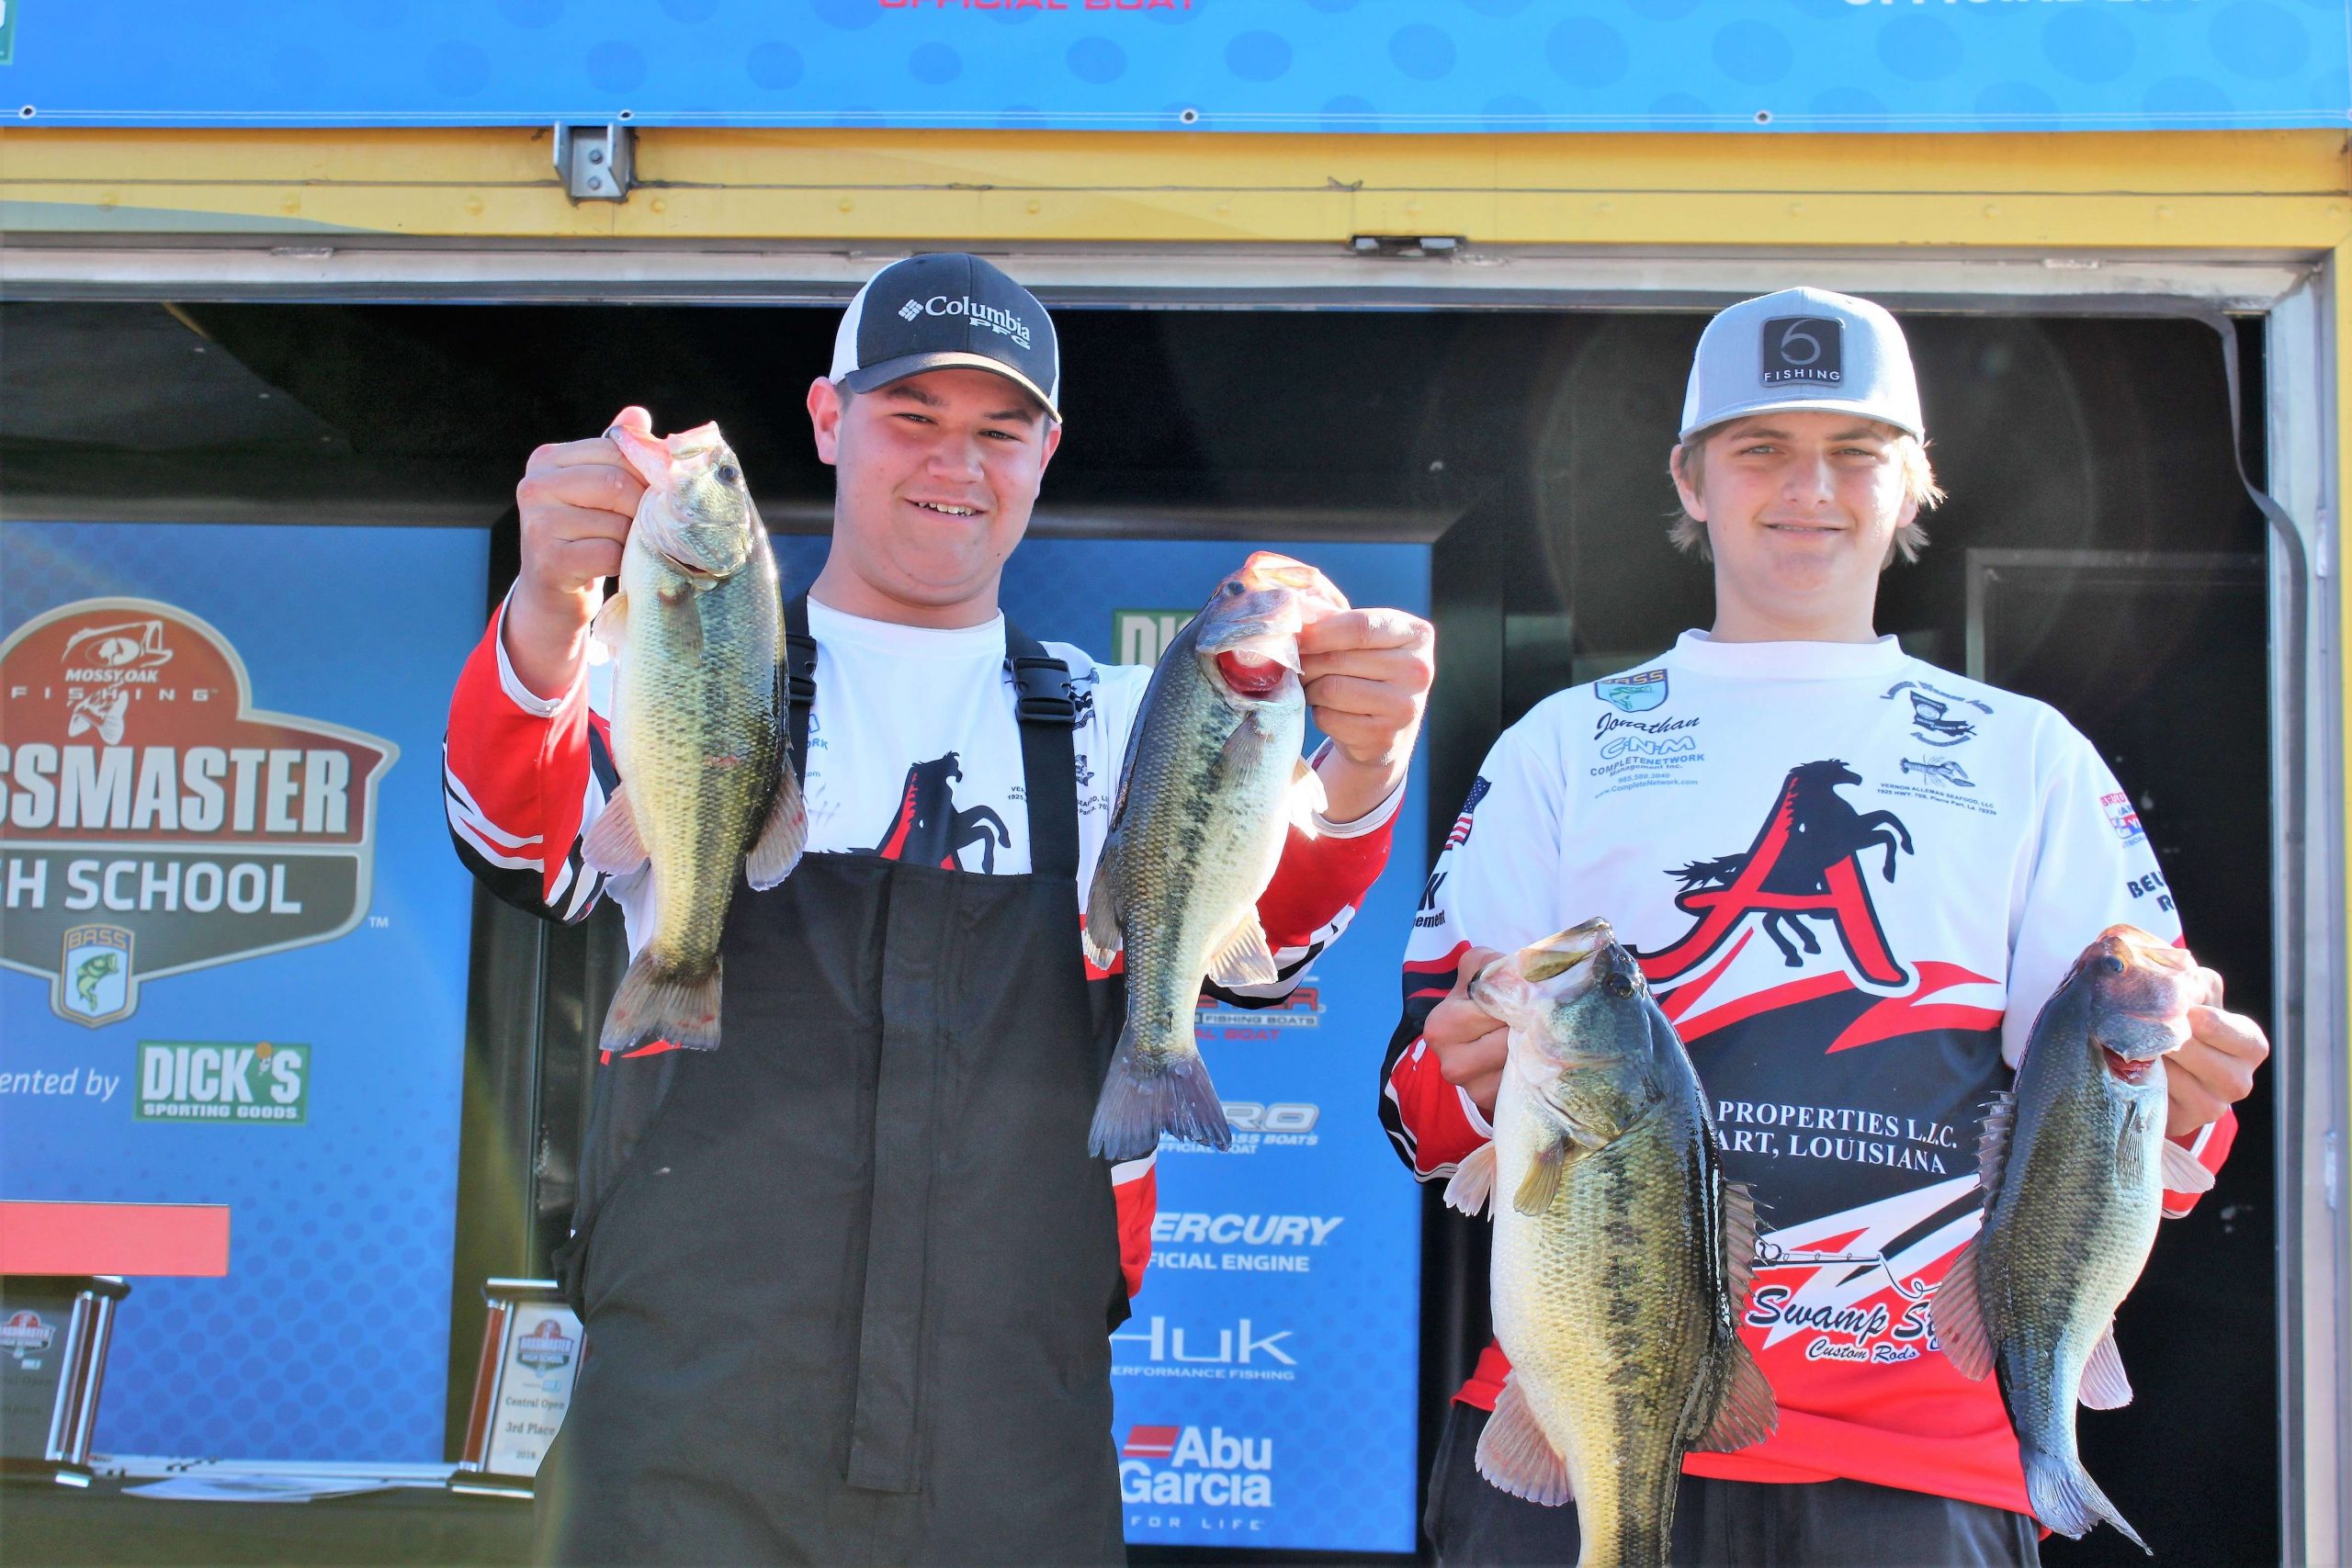 But thereâs a whole lot of anglers who still have to cross the stage. And here are two with a nice bag. Thatâs Johnathan Burns and Zach Naquin of Louisianaâs Assumption High School finished 14th with 13-6.